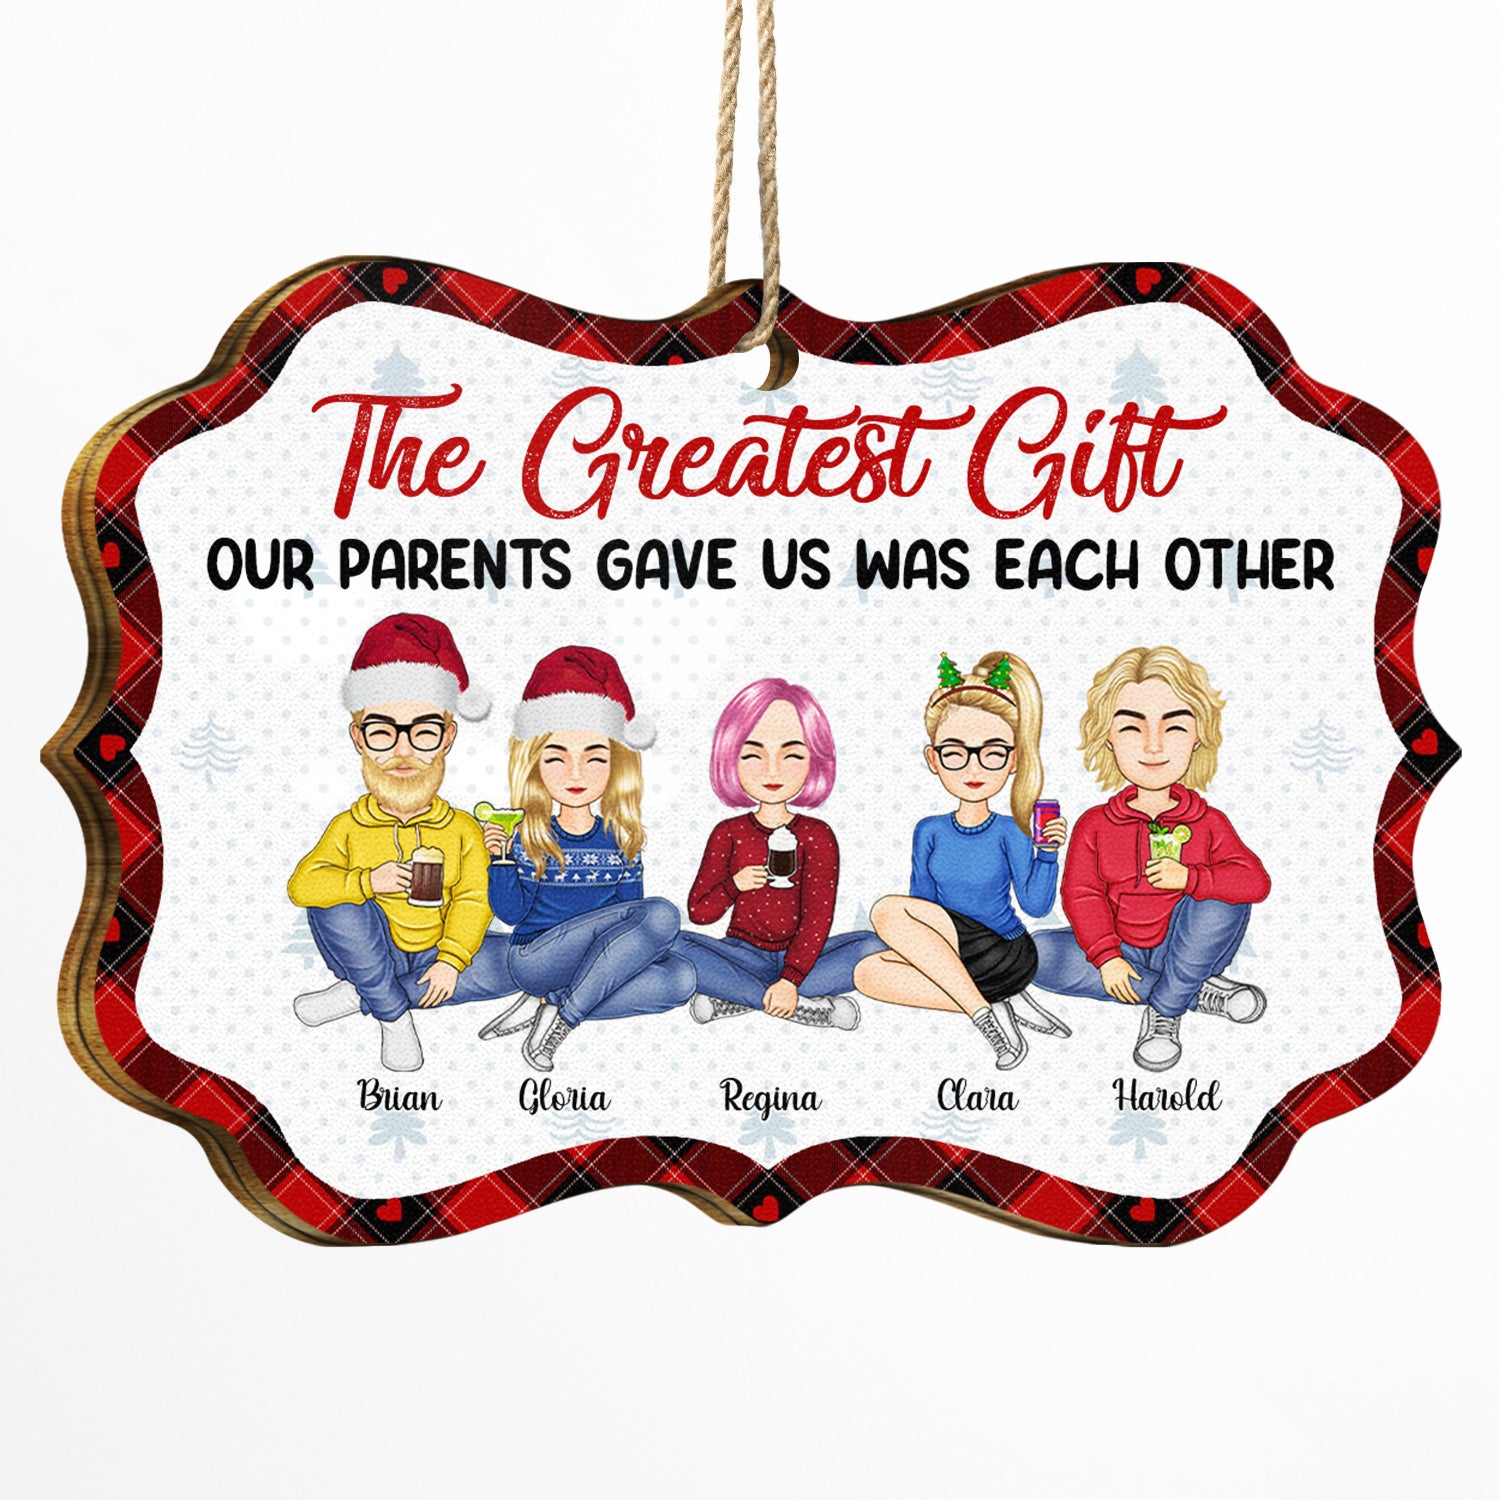 The Greatest Gift Our Parents Gave Us - Christmas Gifts For Brothers, Sisters, Siblings - Personalized Medallion Wooden Ornament